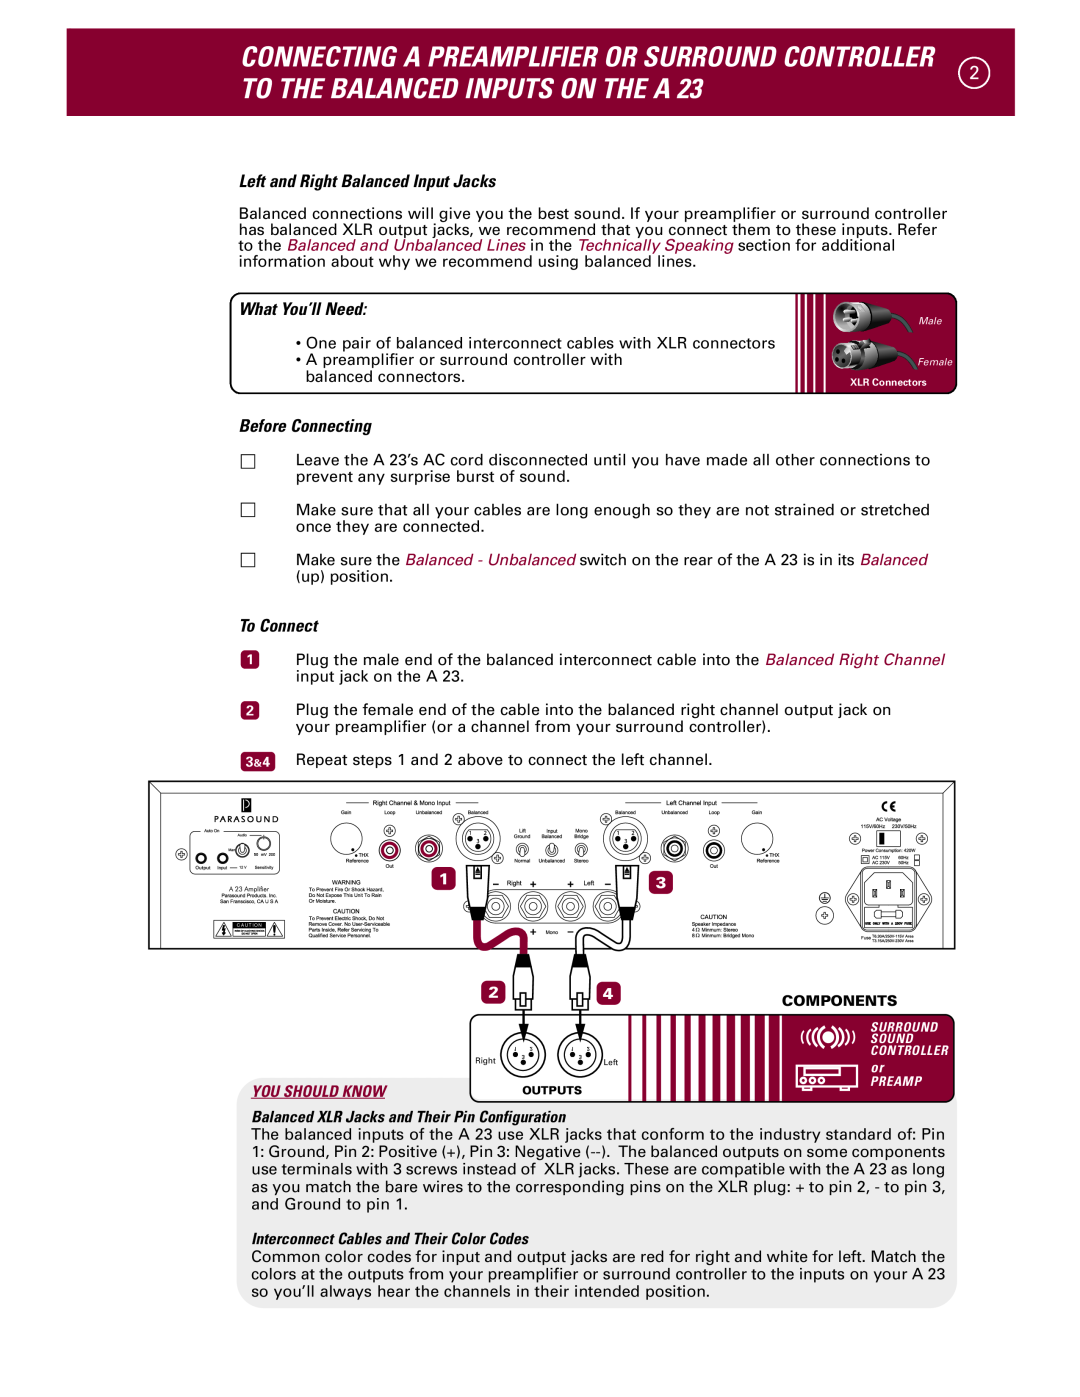 Parasound A 23 manual To The Balanced Inputs On The A, Connecting A Preamplifier Or Surround Controller, What You’ll Need 